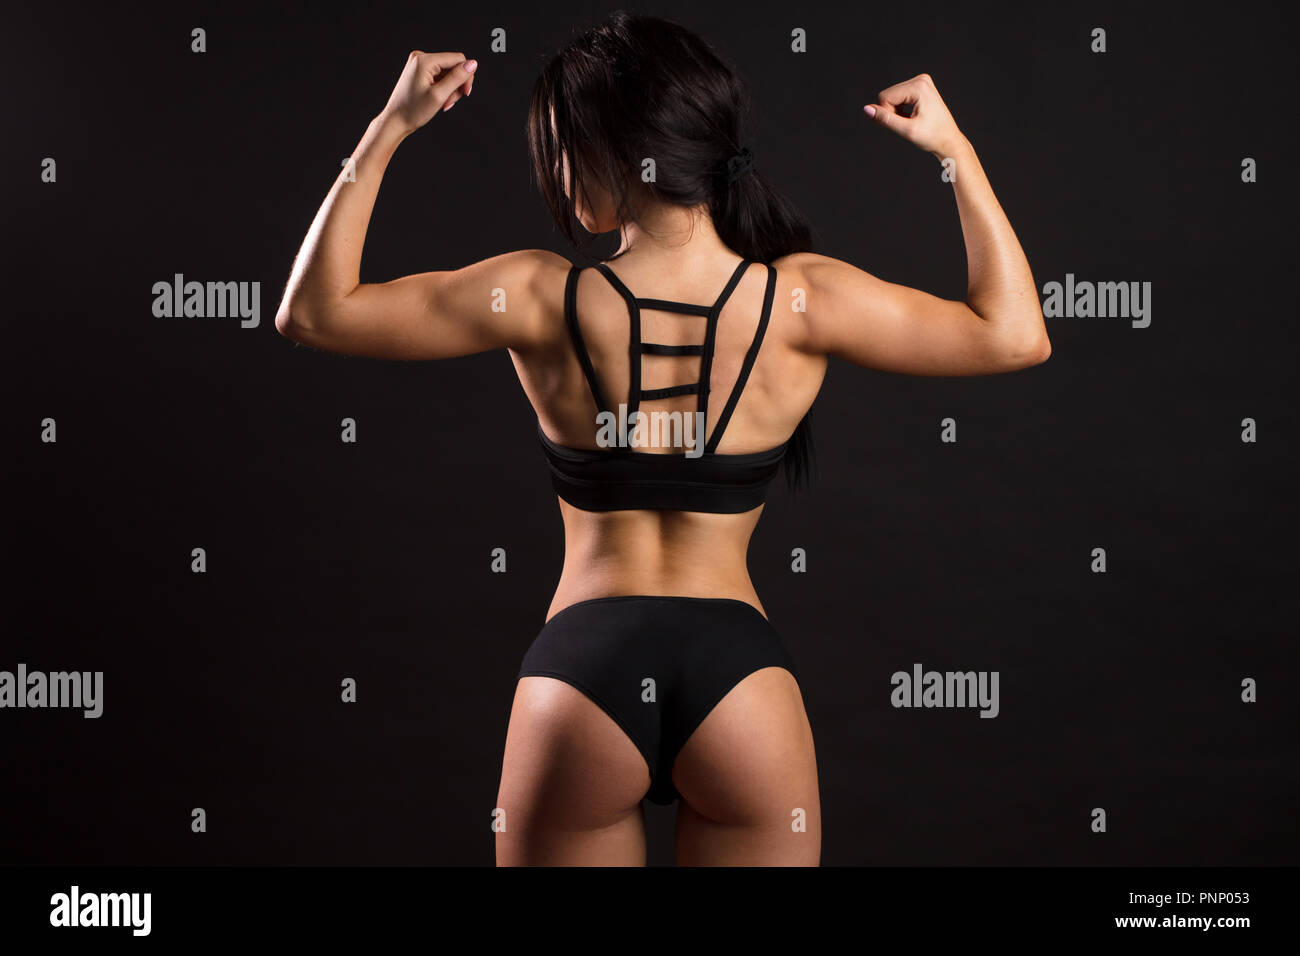 Fitness female showing muscular back